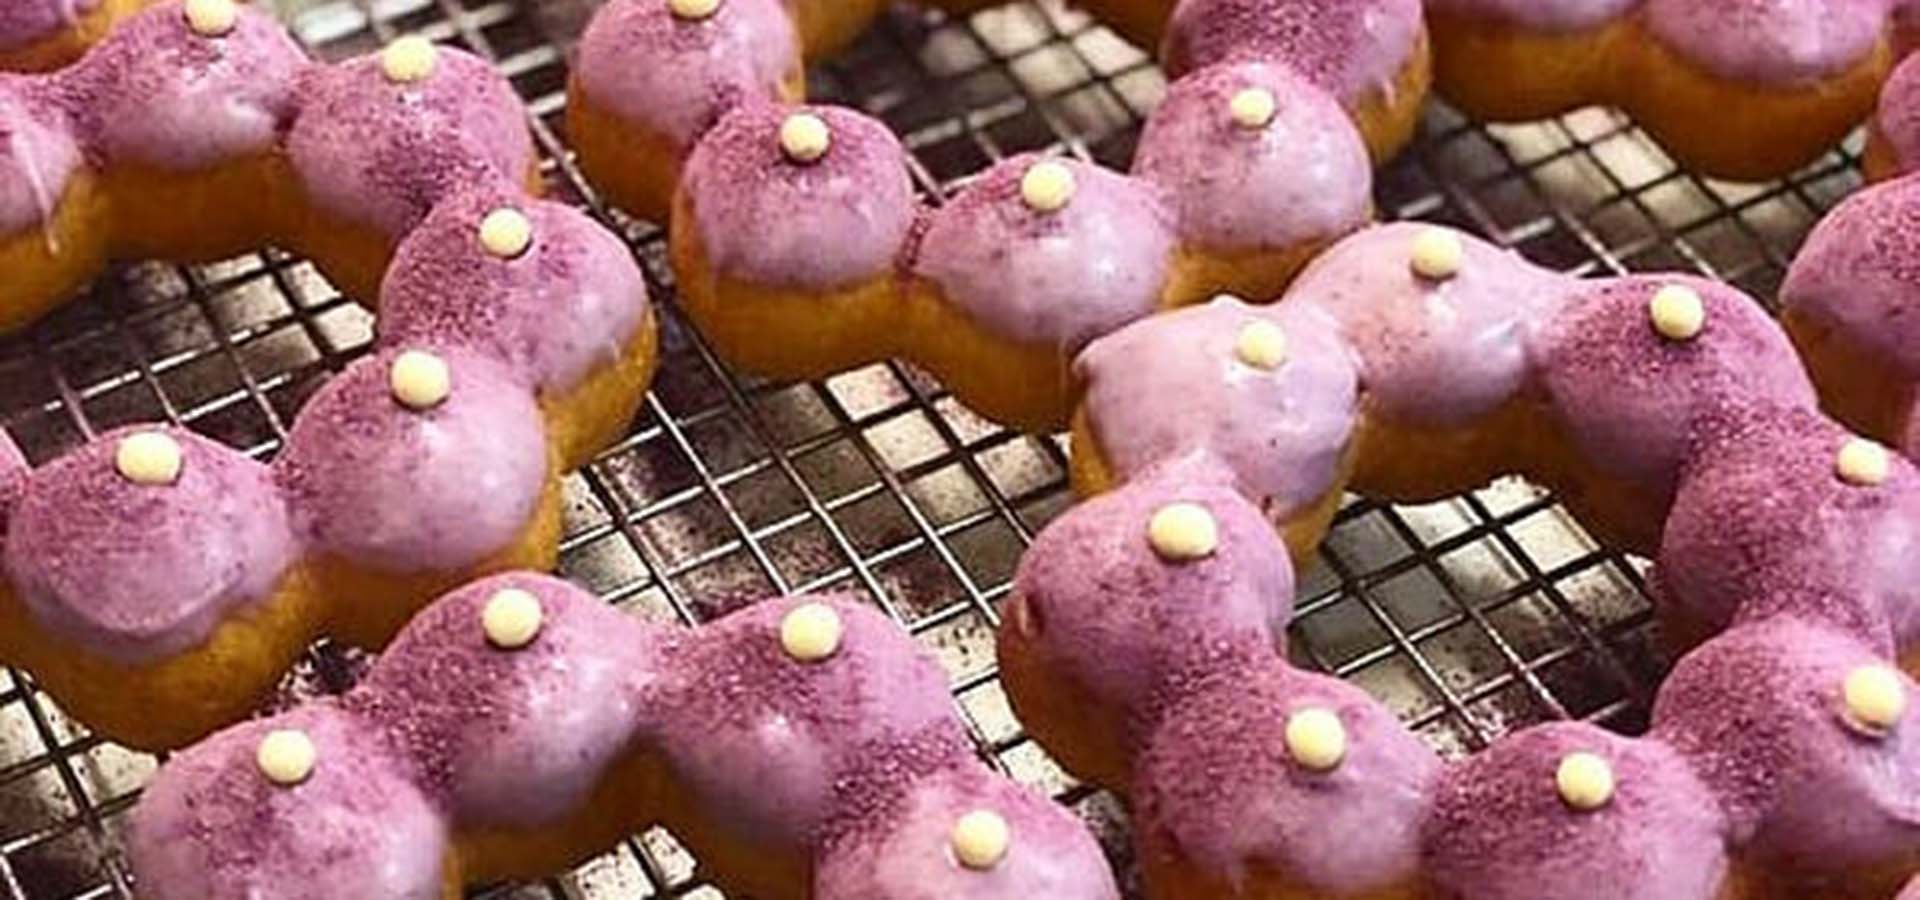 Mochi donuts with a pink glaze on a baking rack.